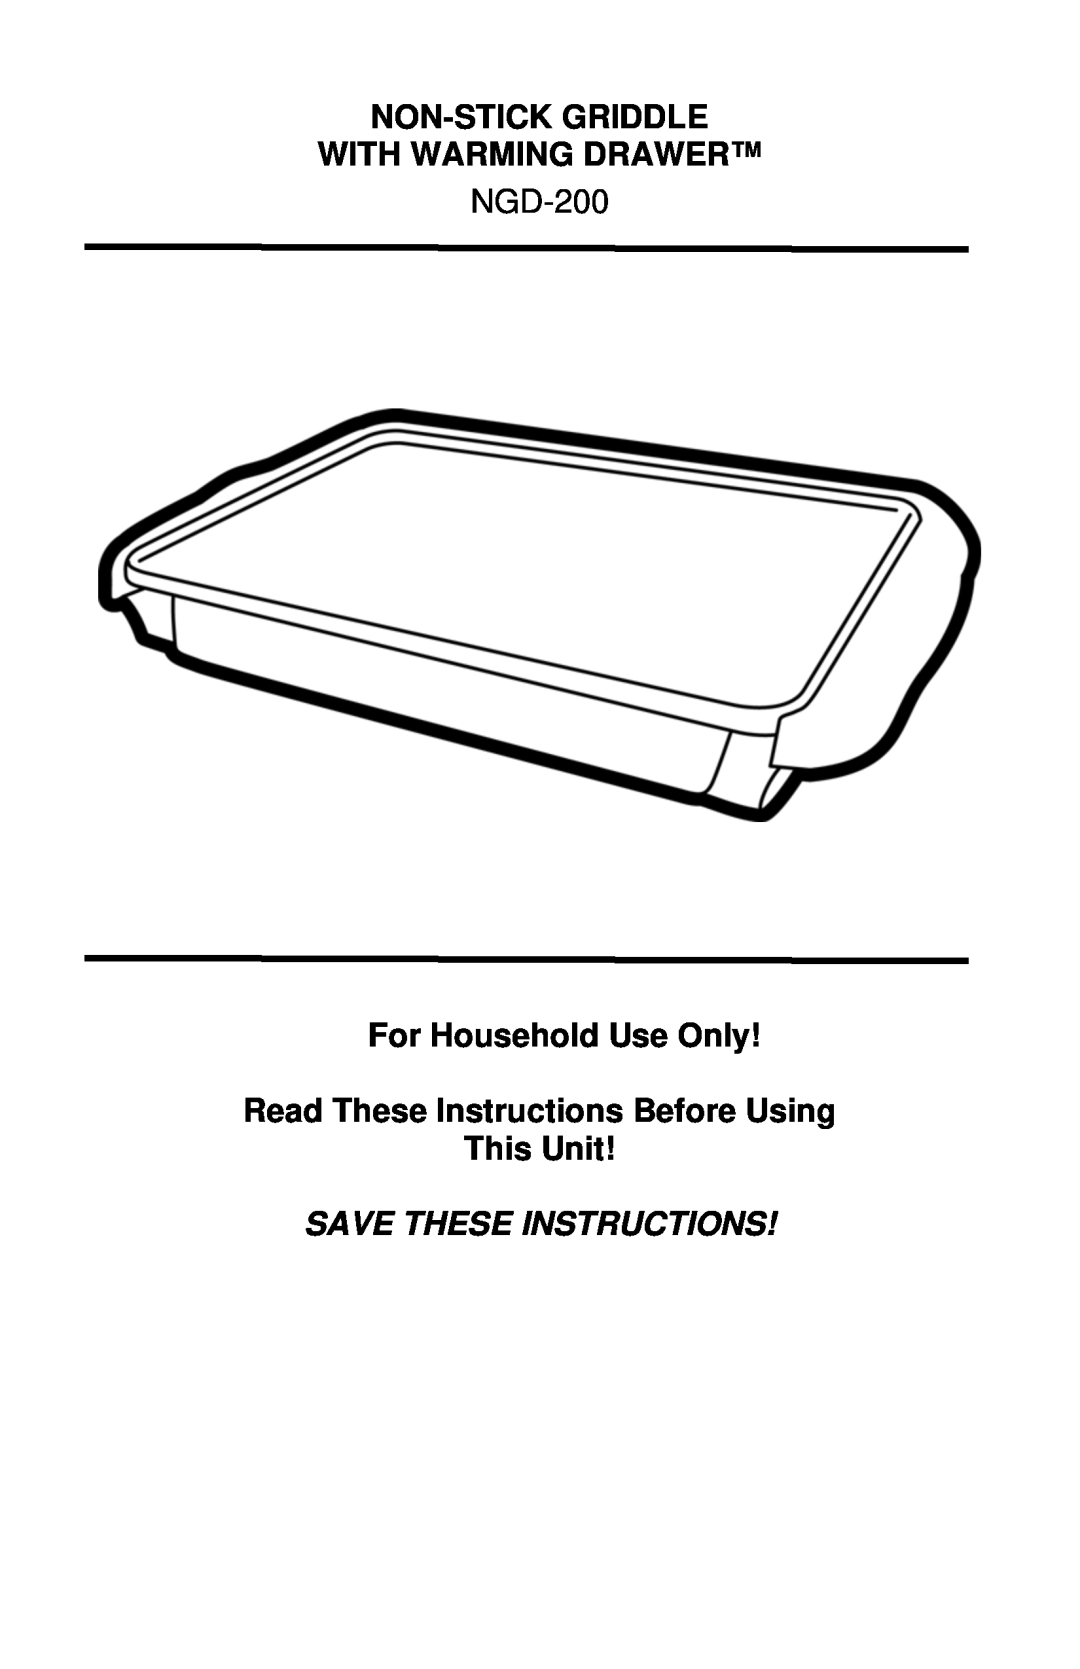 Nostalgia Electrics NGD-200 manual Non-Stickgriddle With Warming Drawer, For Household Use Only, Save These Instructions 